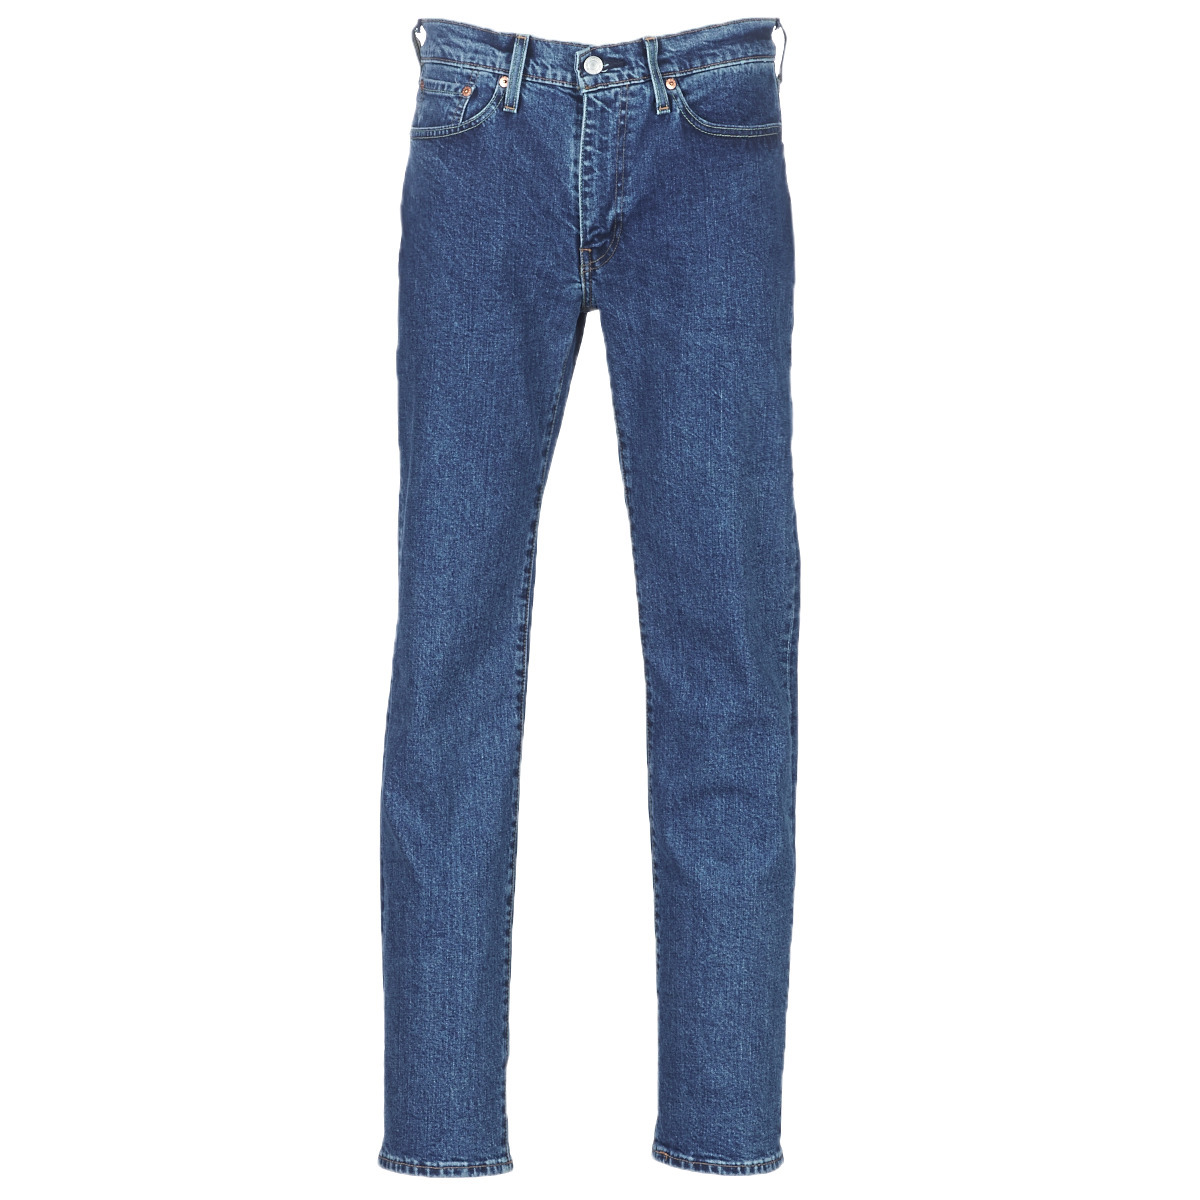 Jeans in Blue Levi's - Spartoo GOOFASH